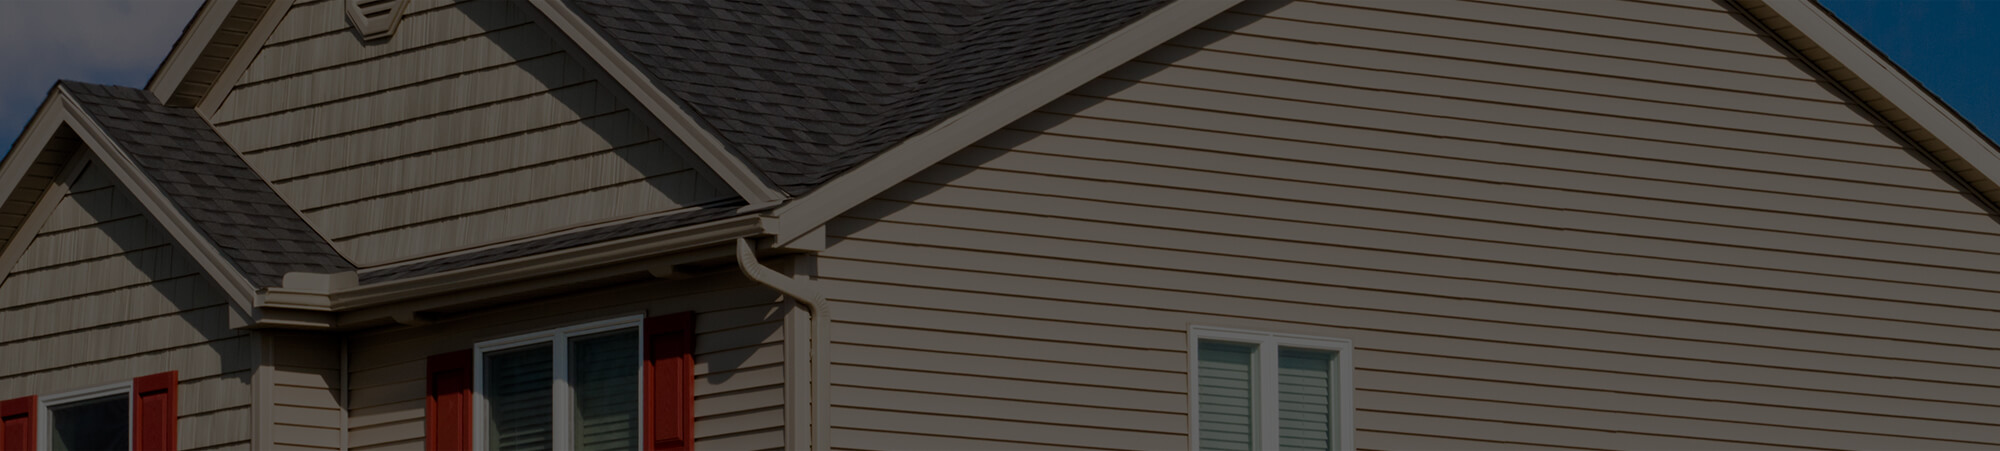 siding installation and replacement services in fox crossing wi